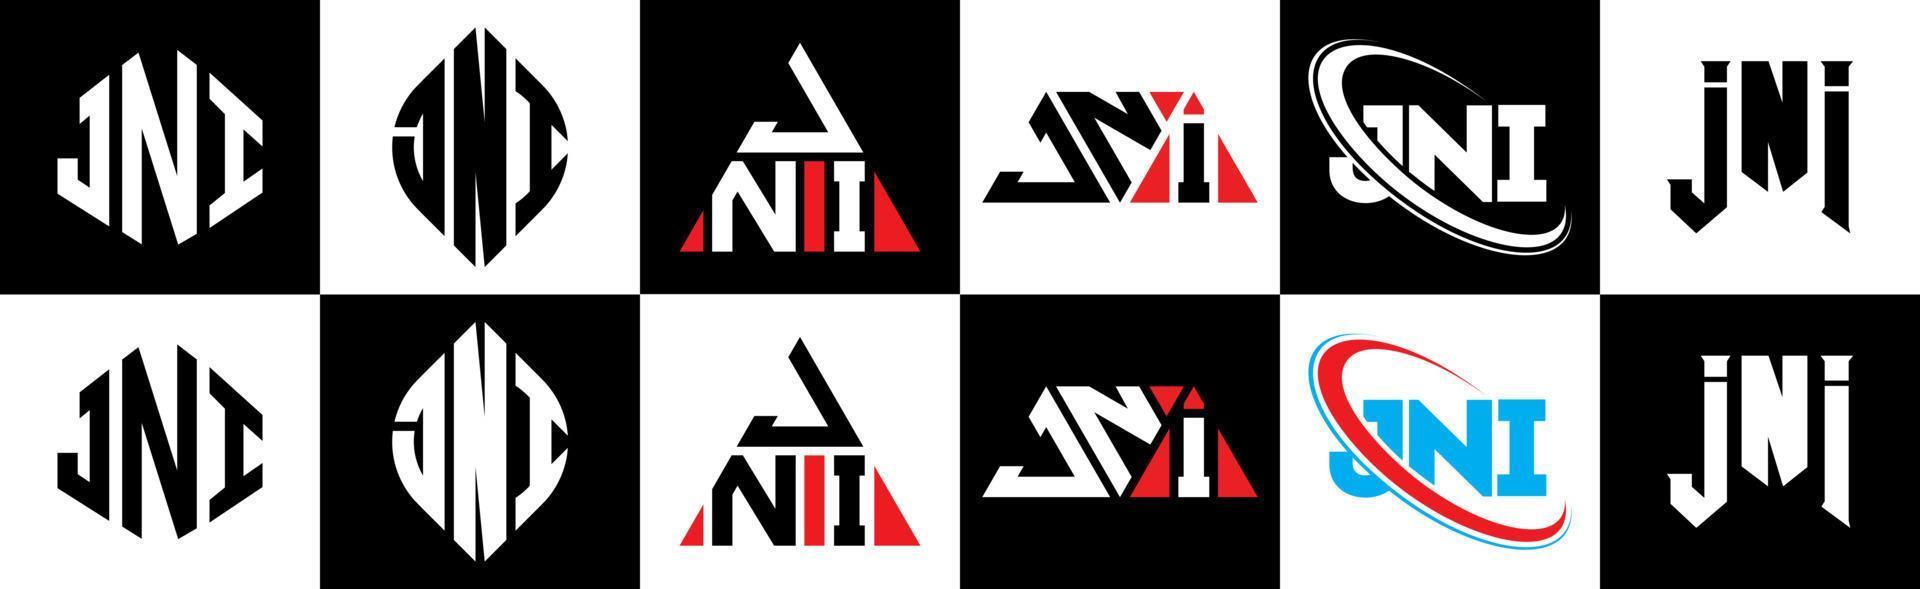 JNI letter logo design in six style. JNI polygon, circle, triangle, hexagon, flat and simple style with black and white color variation letter logo set in one artboard. JNI minimalist and classic logo vector